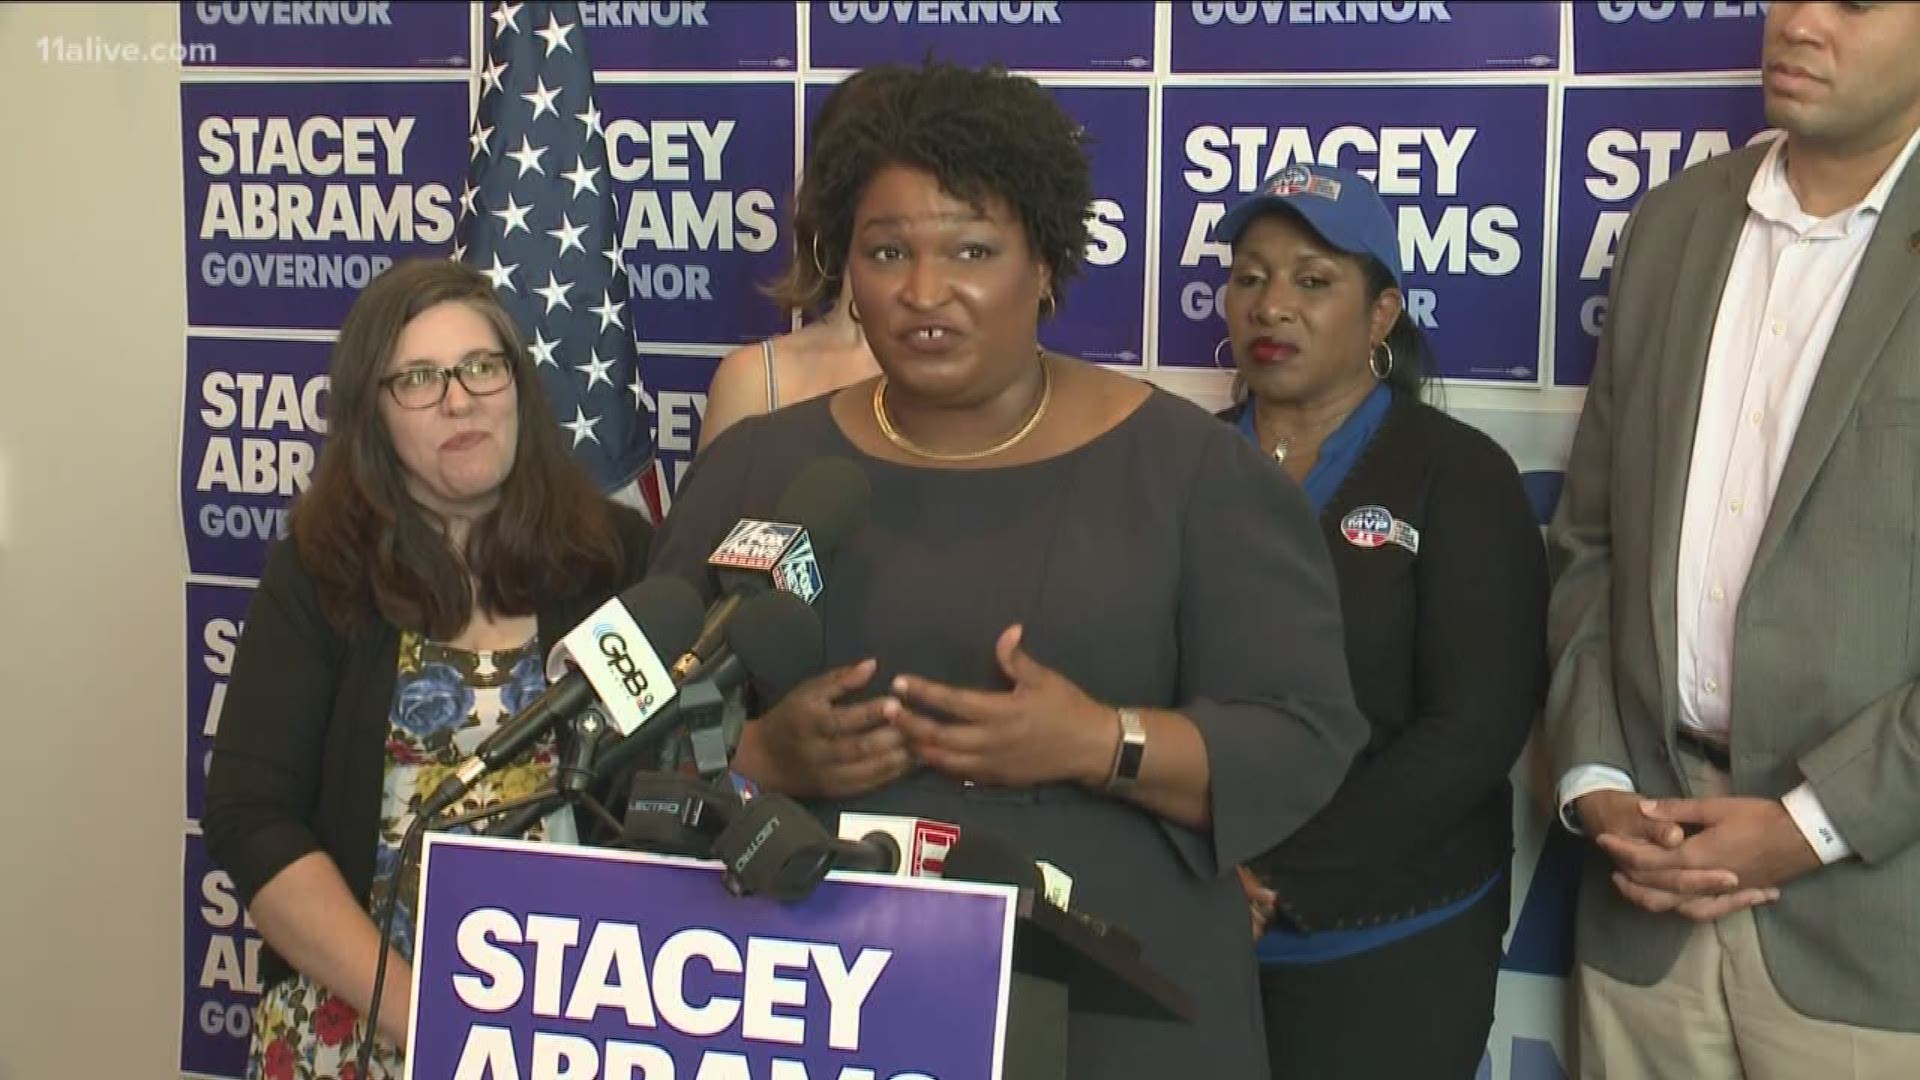 When she filed a disclosure form in March, Democrat Stacey Abrams disclosed a modest net worth of less than $109,000